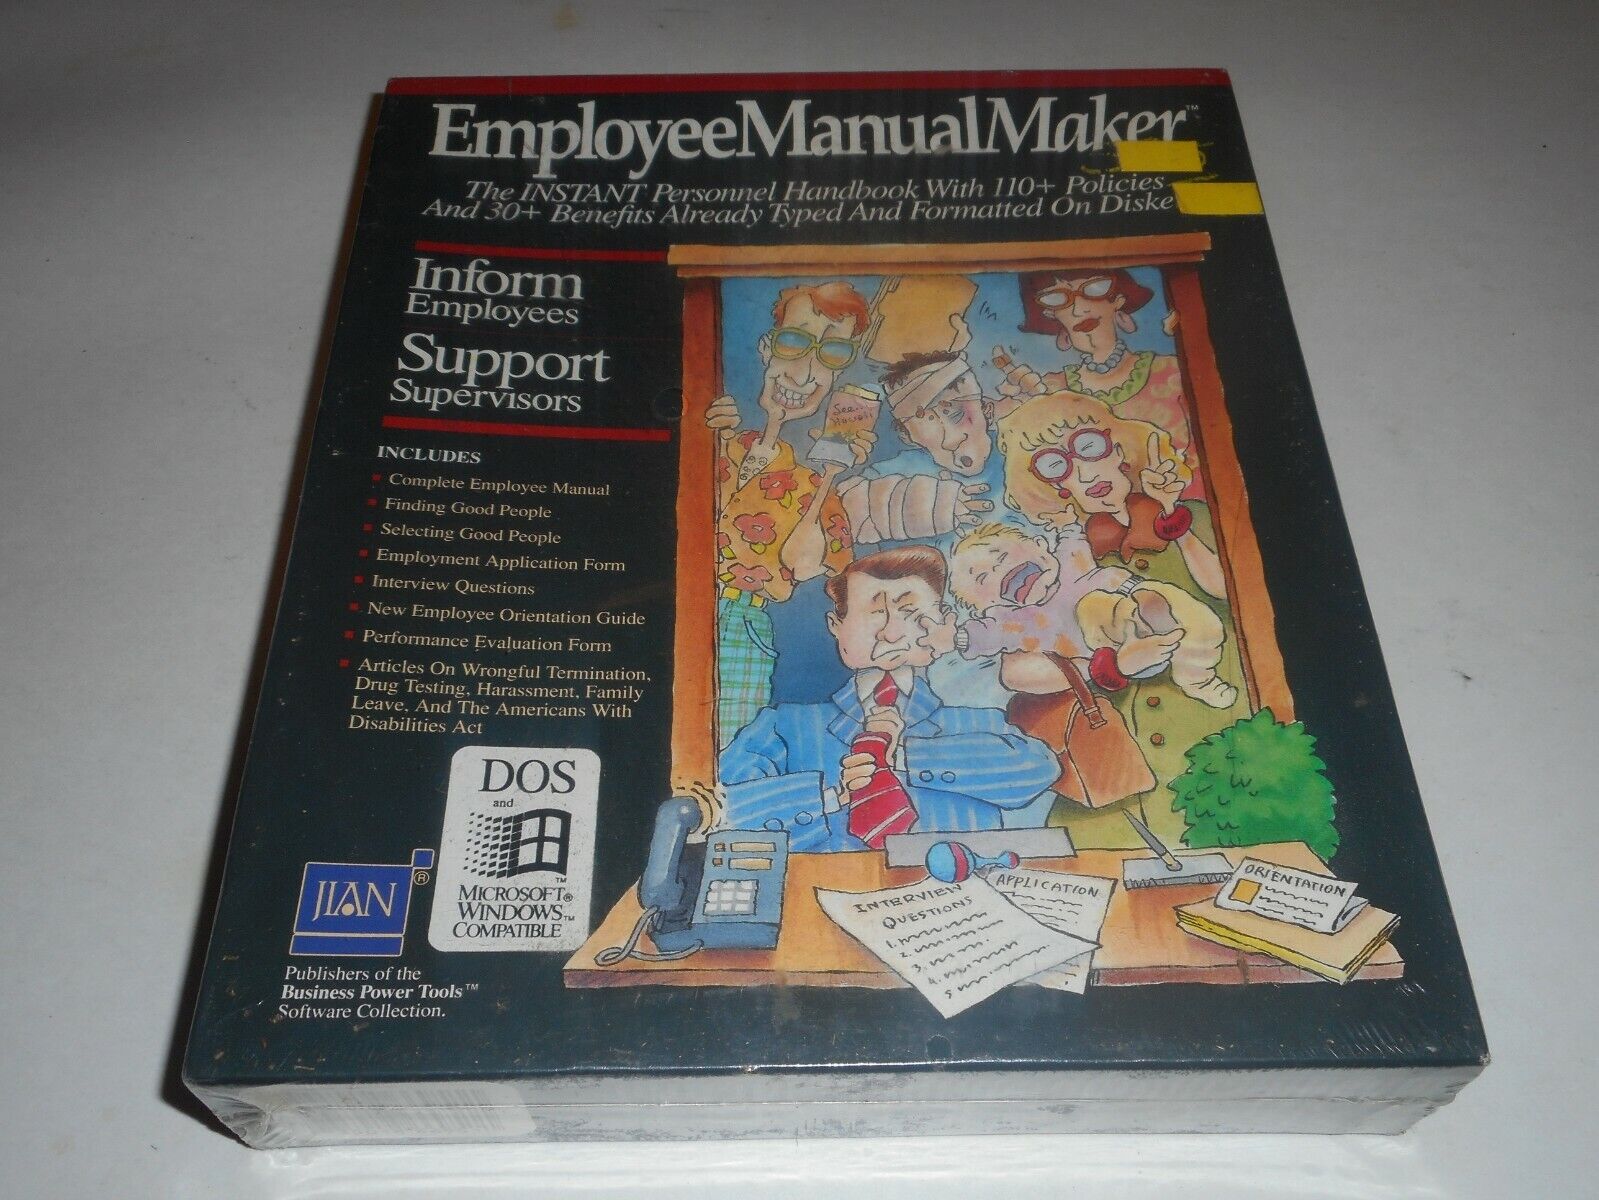 Employee Manual Maker the Instant Personnel Handbook with 110+ Policies (NEW)